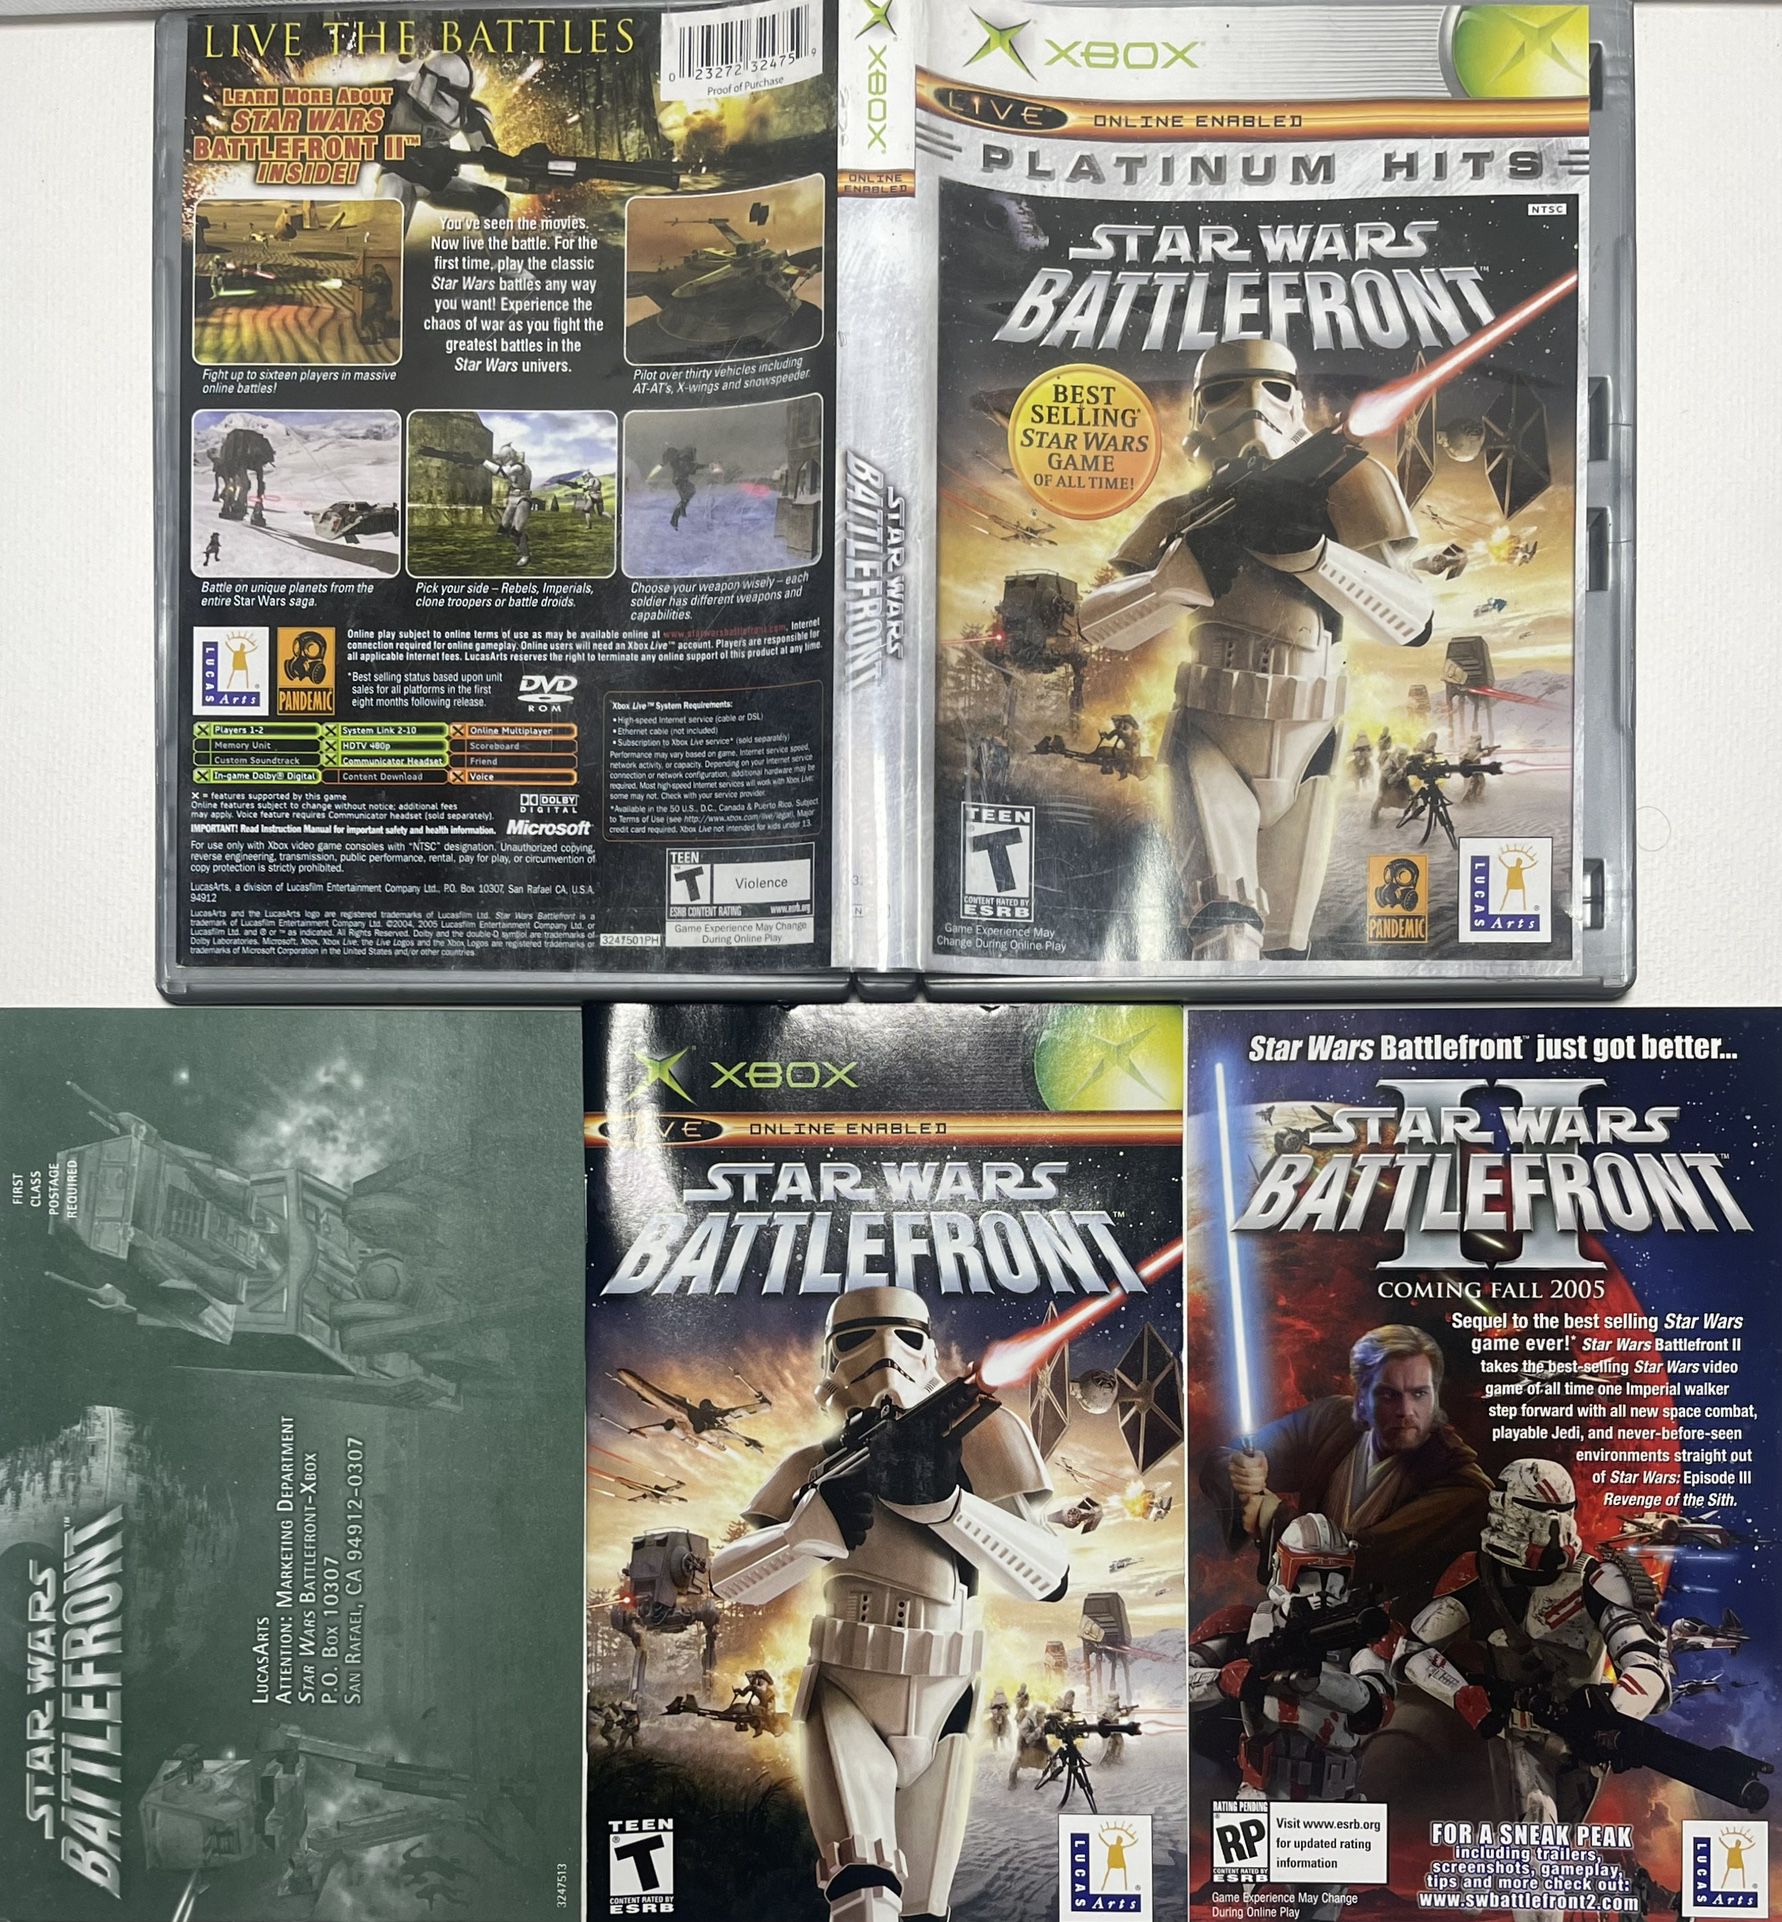 Star Wars: Battlefront II Video Games with Manual for sale